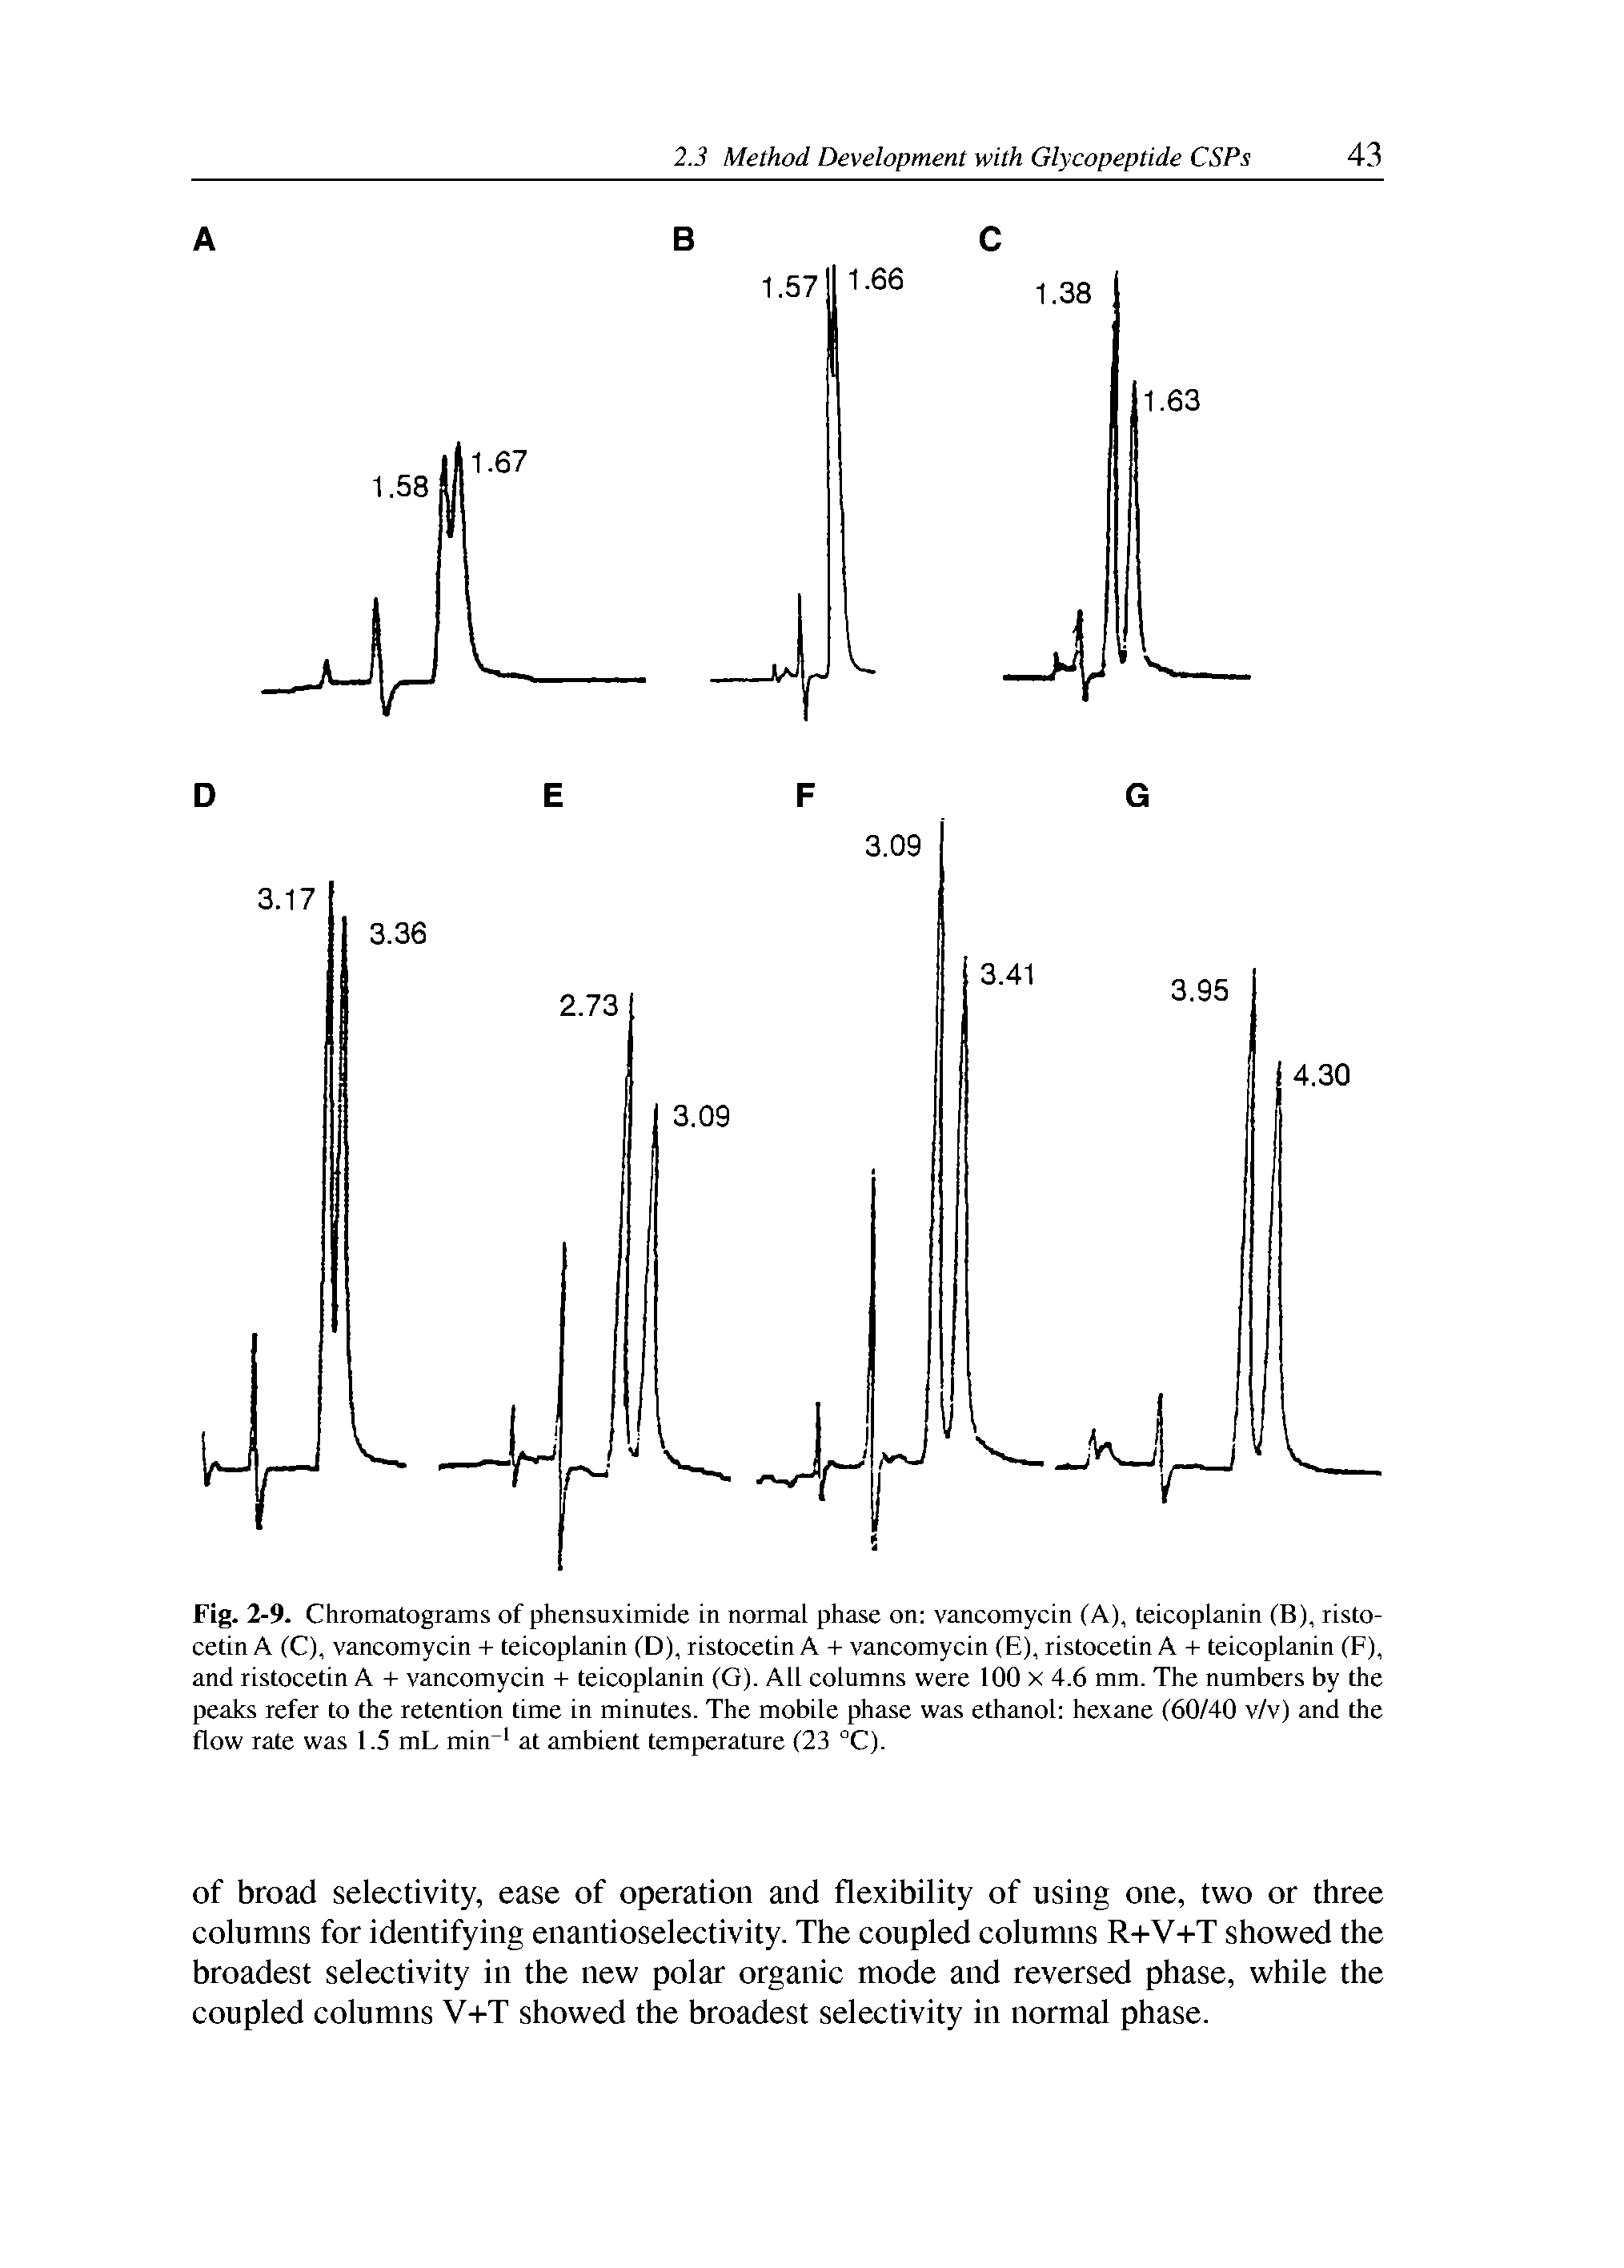 Fig. 2-9. Chromatograms of phensuximide in normal phase on vancomycin (A), teicoplanin (B), ristocetin A (C), vancomycin + teicoplanin (D), ristocetin A + vancomycin (E), ristocetin A + teicoplanin (F), and ristocetin A + vancomycin + teicoplanin (G). All columns were 100 x 4.6 mm. The numbers by the peaks refer to the retention time in minutes. The mobile phase was ethanol hexane (60/40 v/v) and the flow rate was 1.5 mL min at ambient temperature (23 °C).